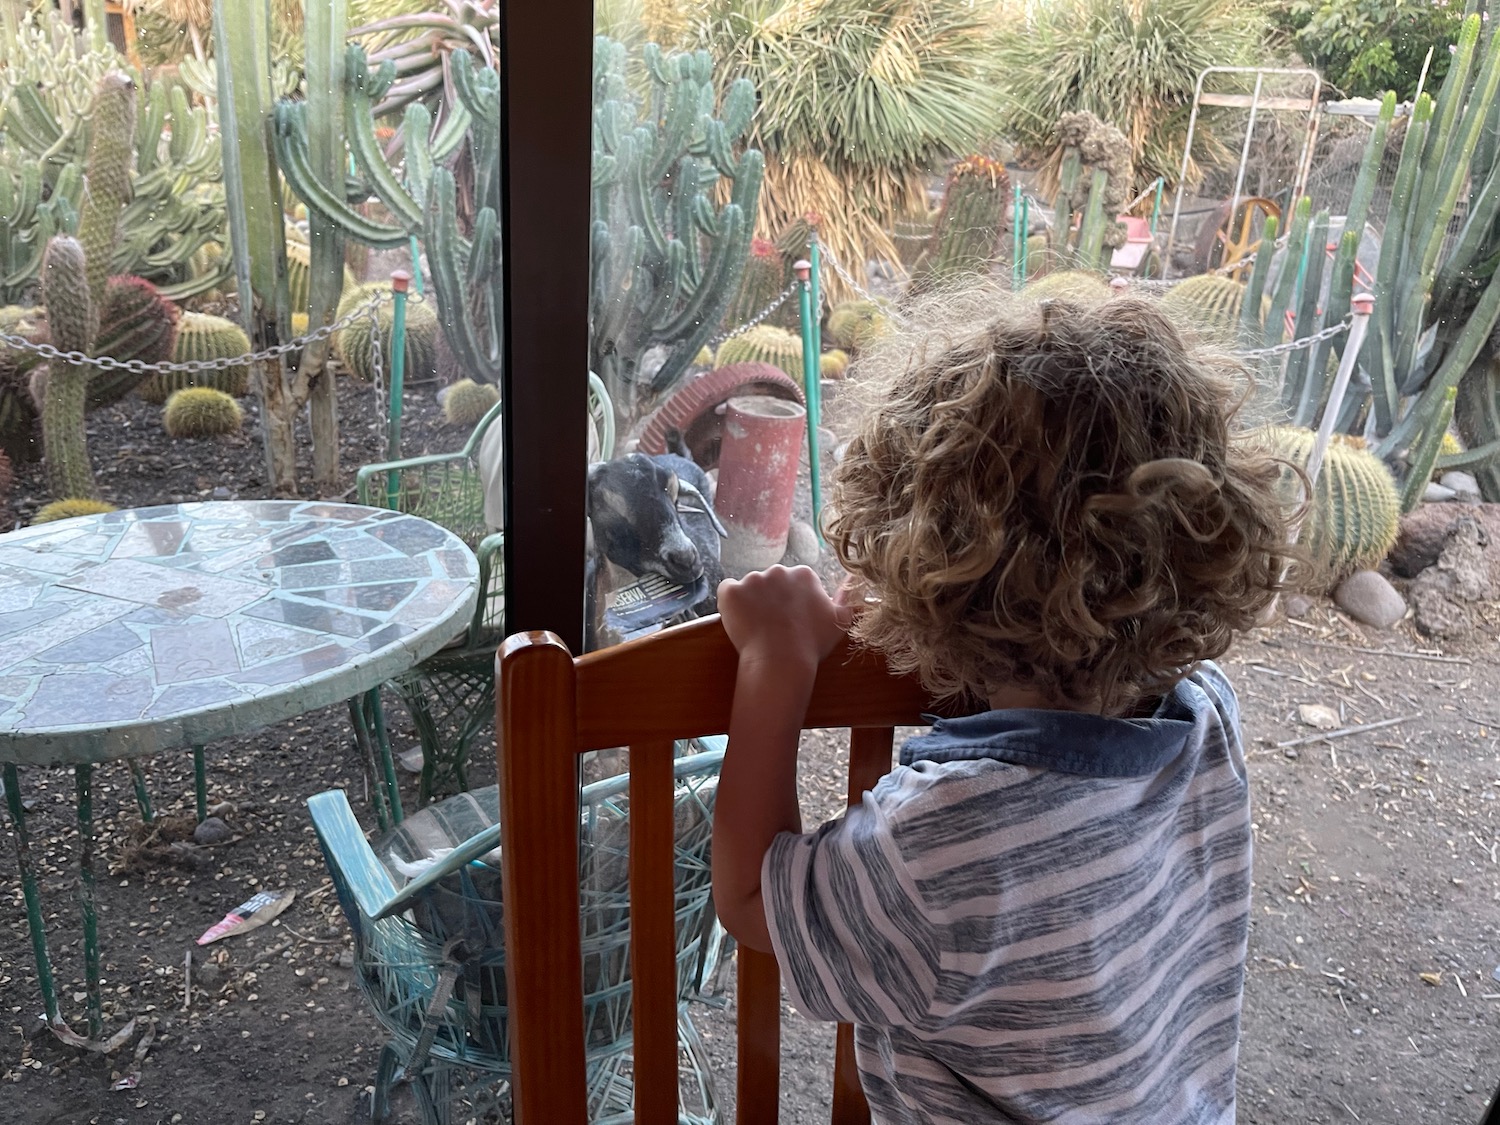 a child looking at a goat through a window